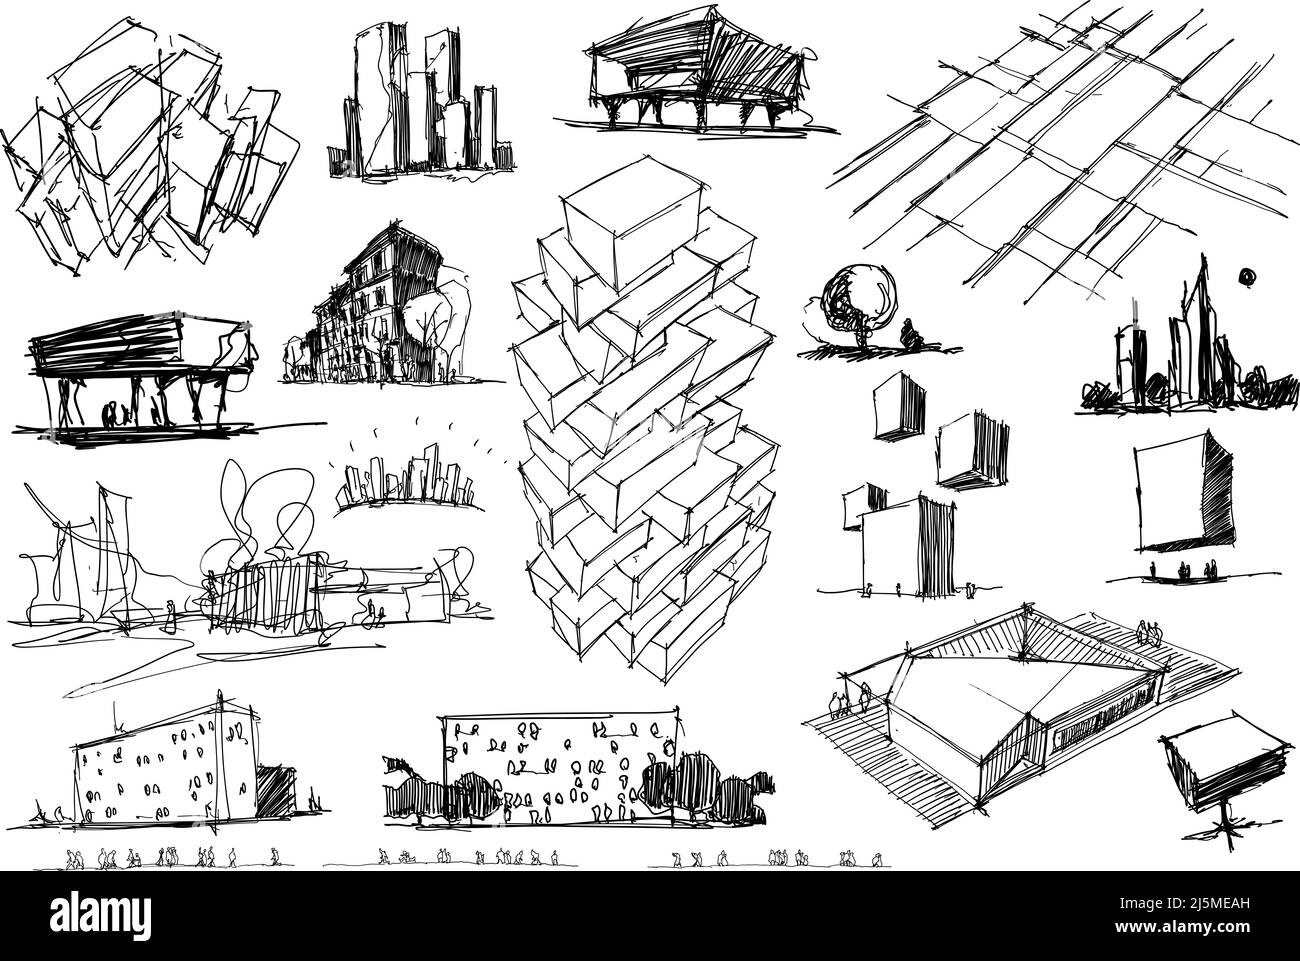 Thinking through drawing  Architectural Review